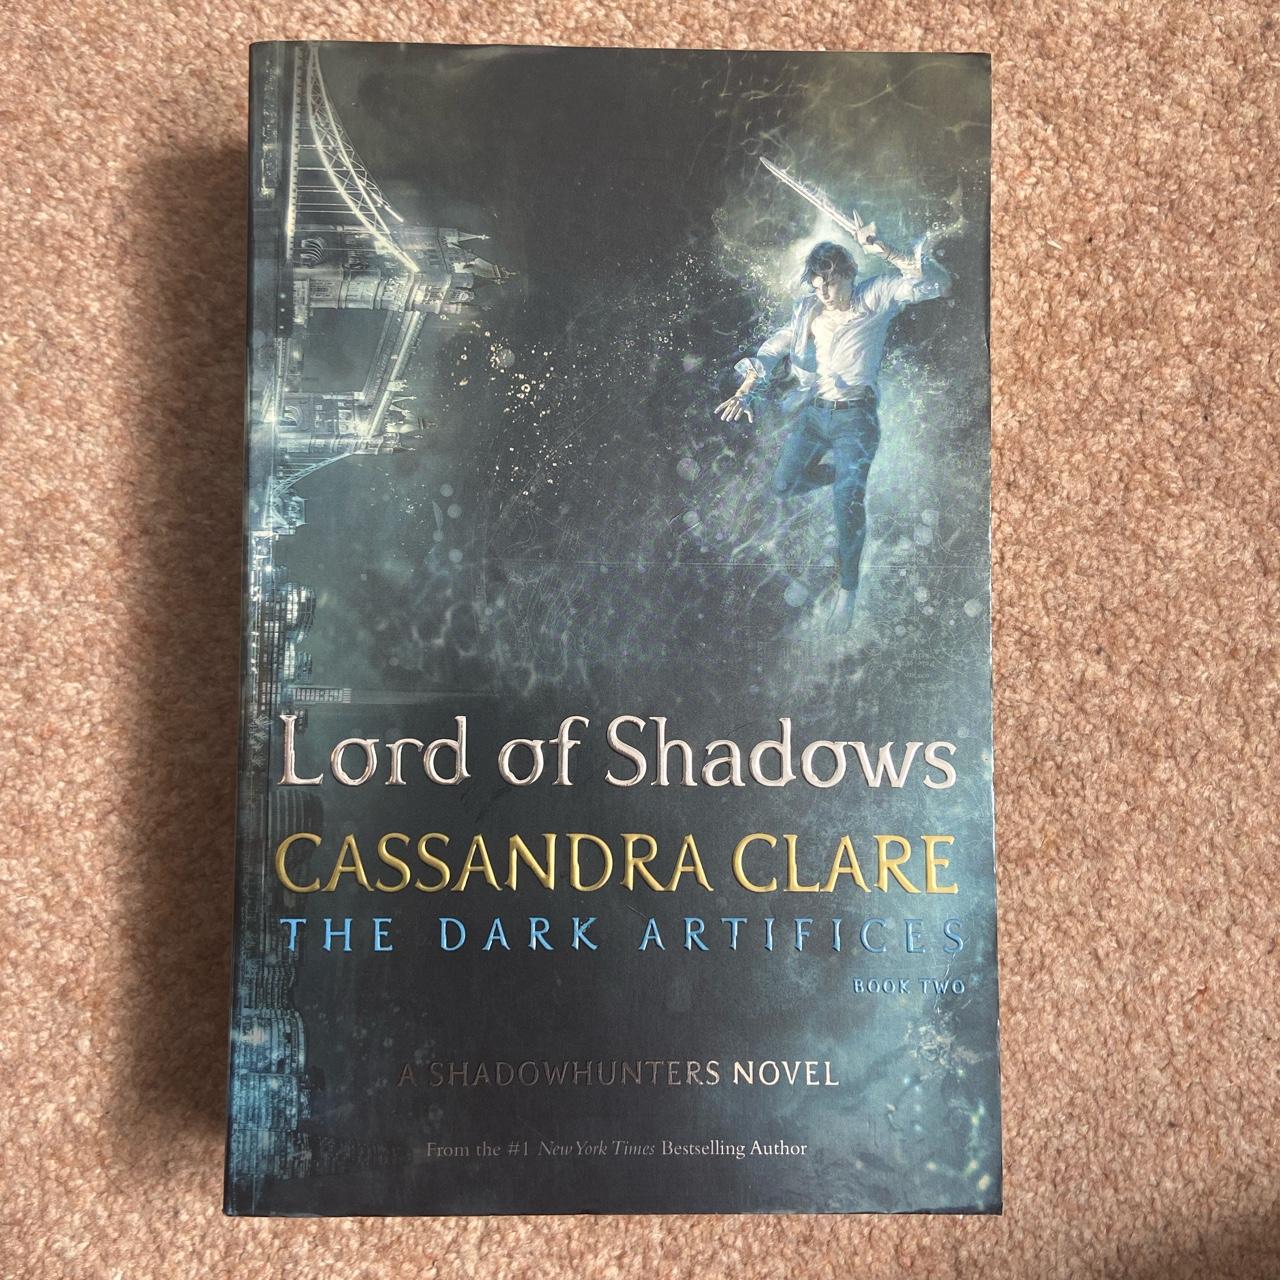 Lord of Shadows by Cassandra Clare –